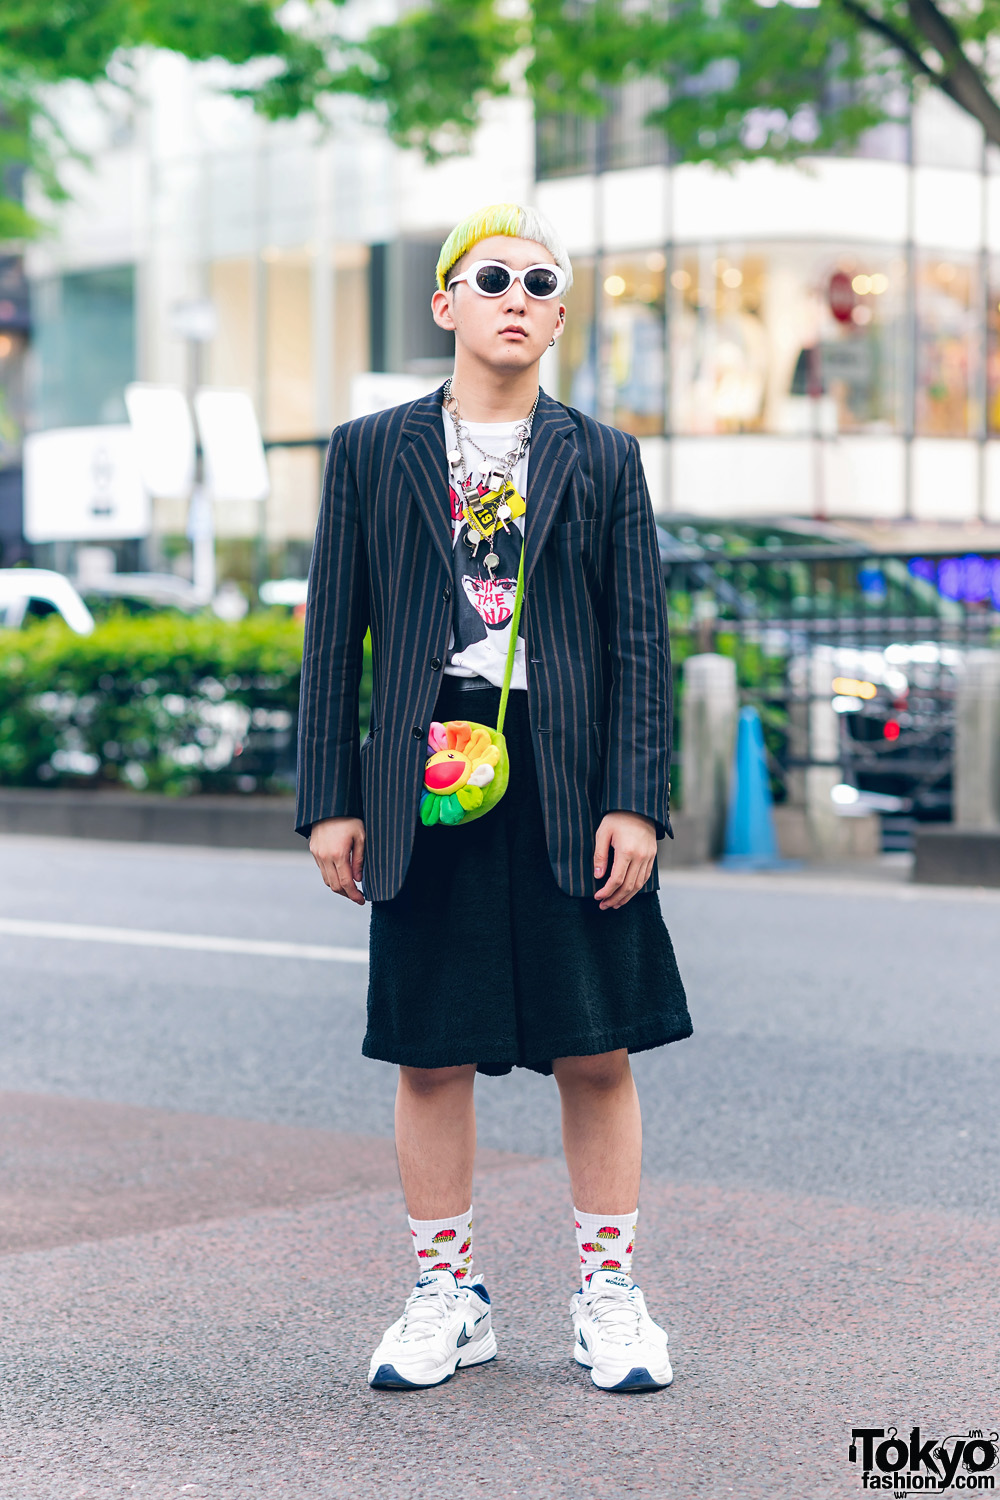 Tokyo Style w/ Two-Tone Hair, Paul Smith, Jun Inagawa x BiSH, Comme des Garcons, Murakami Flower Bag, Vaquera Whistle Necklace & Nike x Martine Rose Sneakers